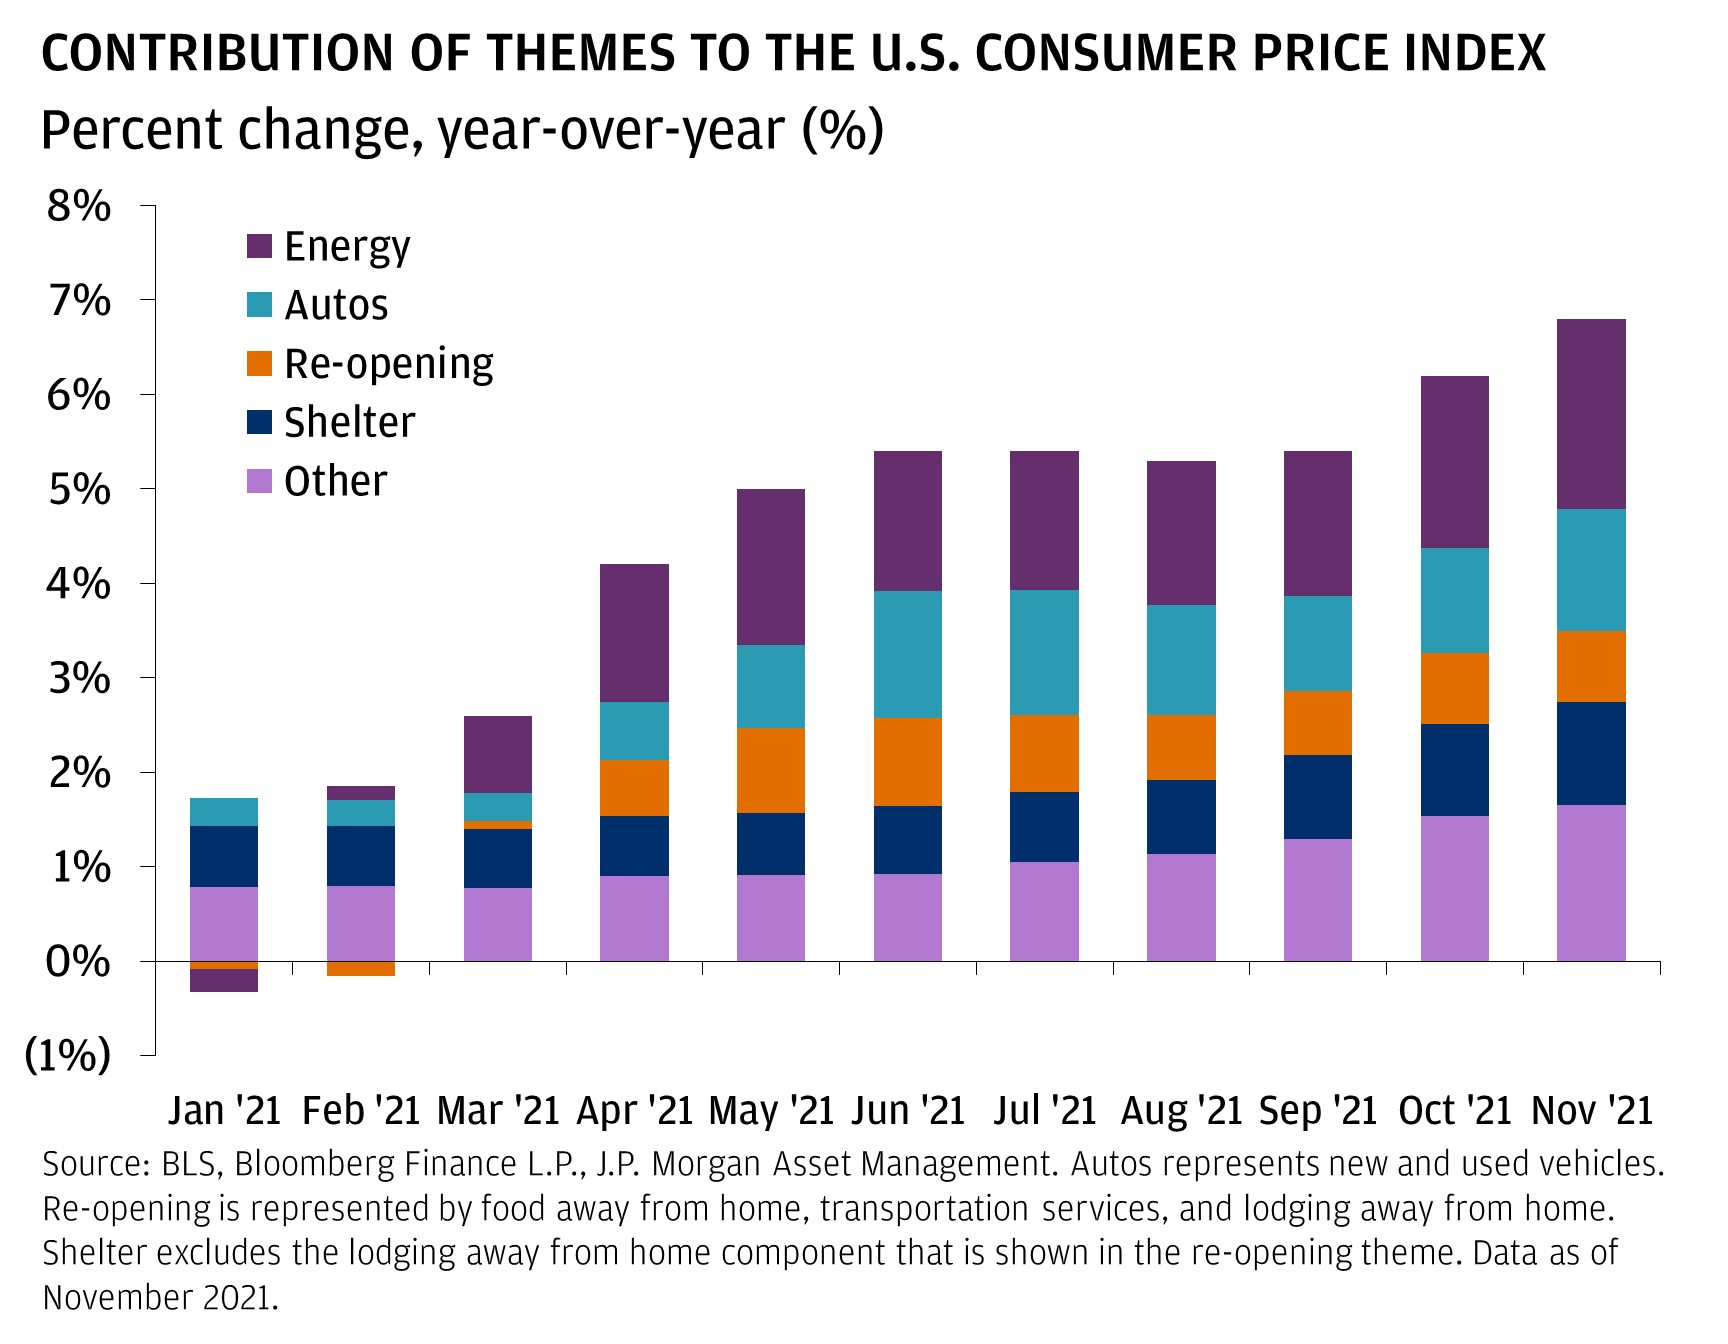 Contribution of themes to the U.S. Consumer Price Index